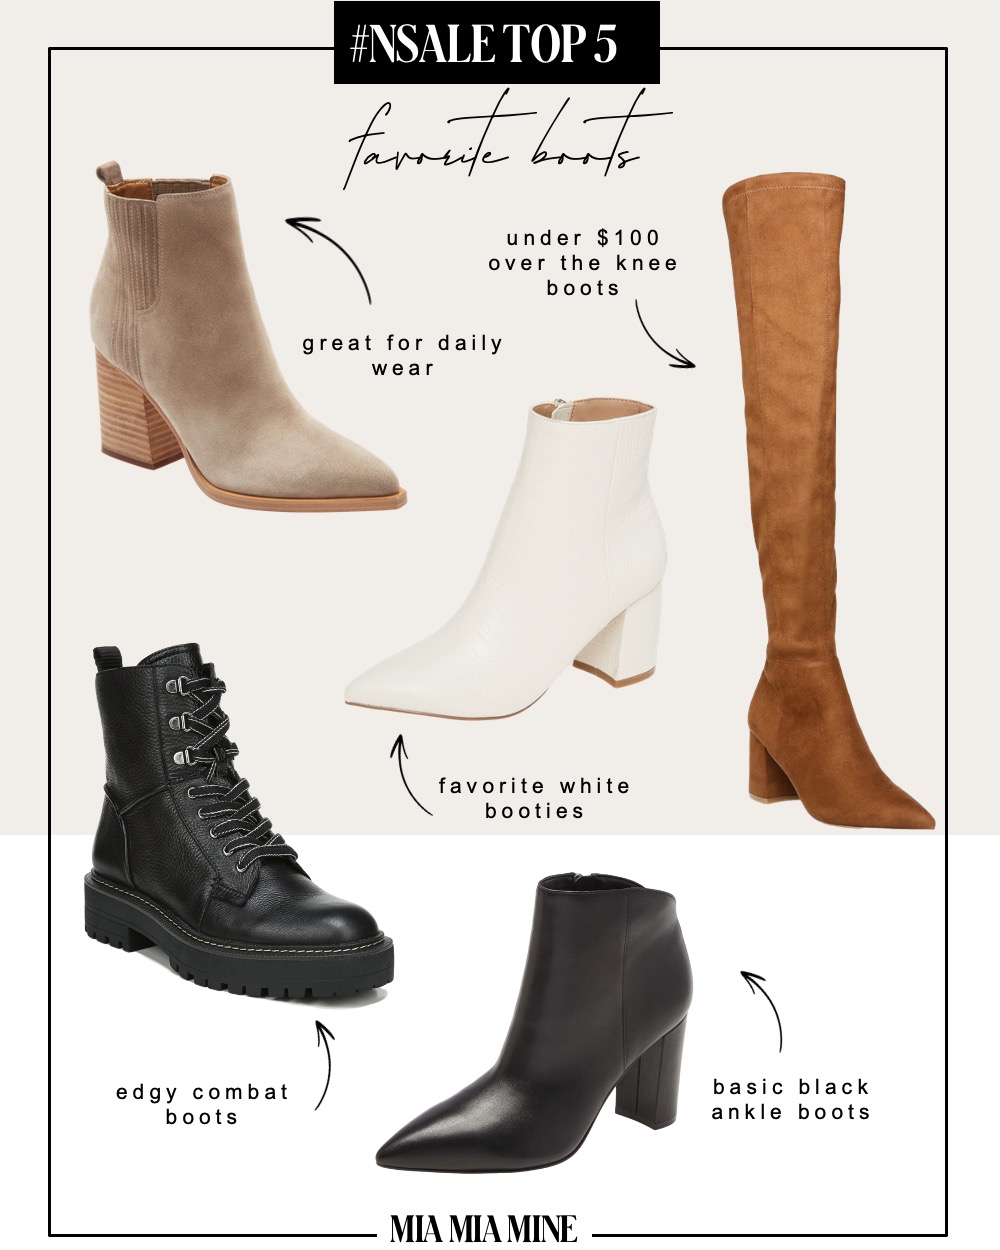 best boot styles from the nordstrom anniversary sale 2020 by fashion blogger mia mia mine